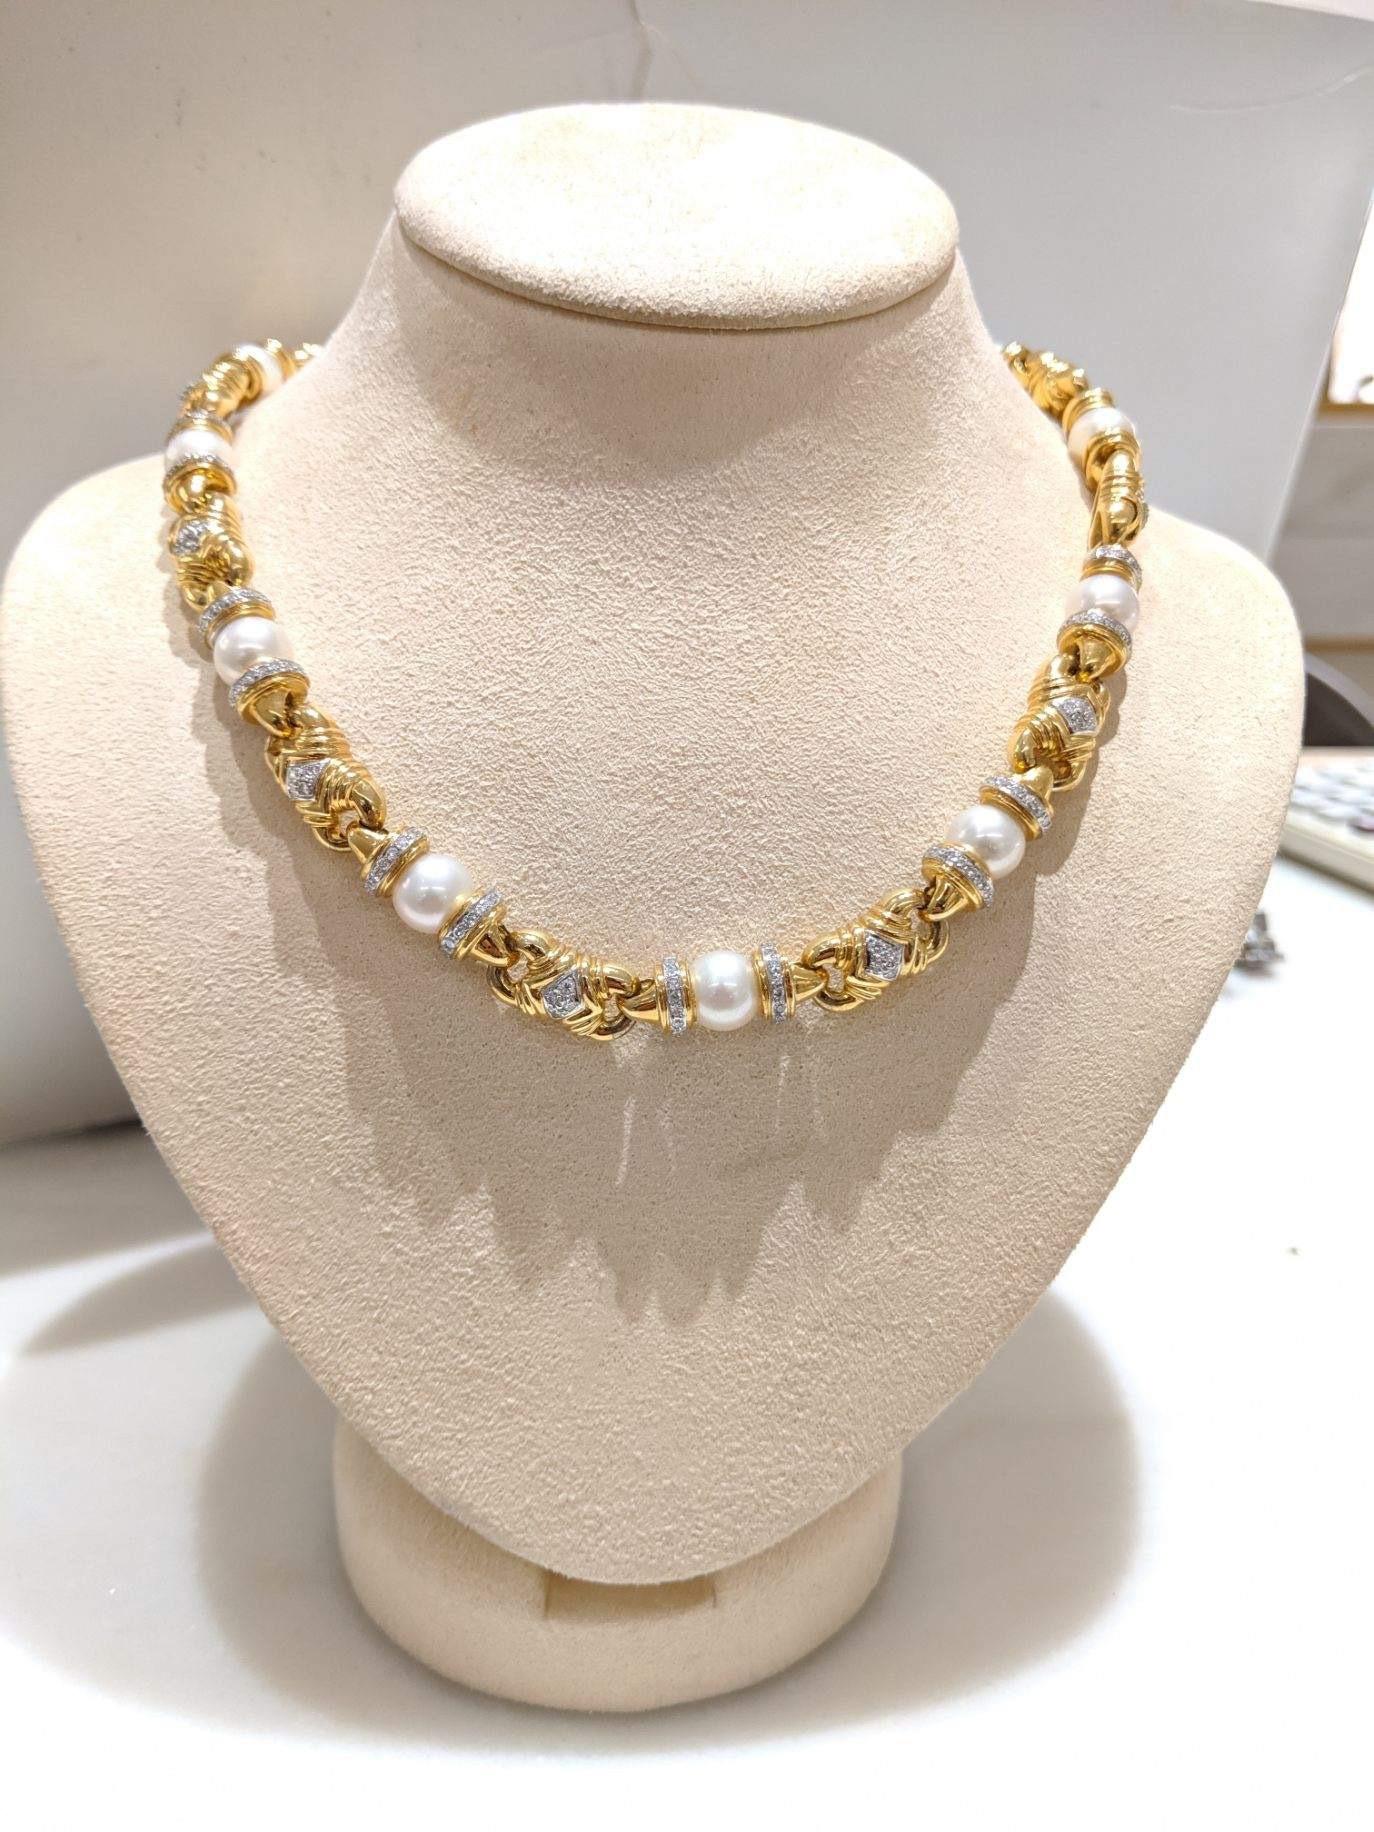 Contemporary Cellini 18 Karat Gold and Cultured Pearl Necklace with 1.98 Carat of Diamonds